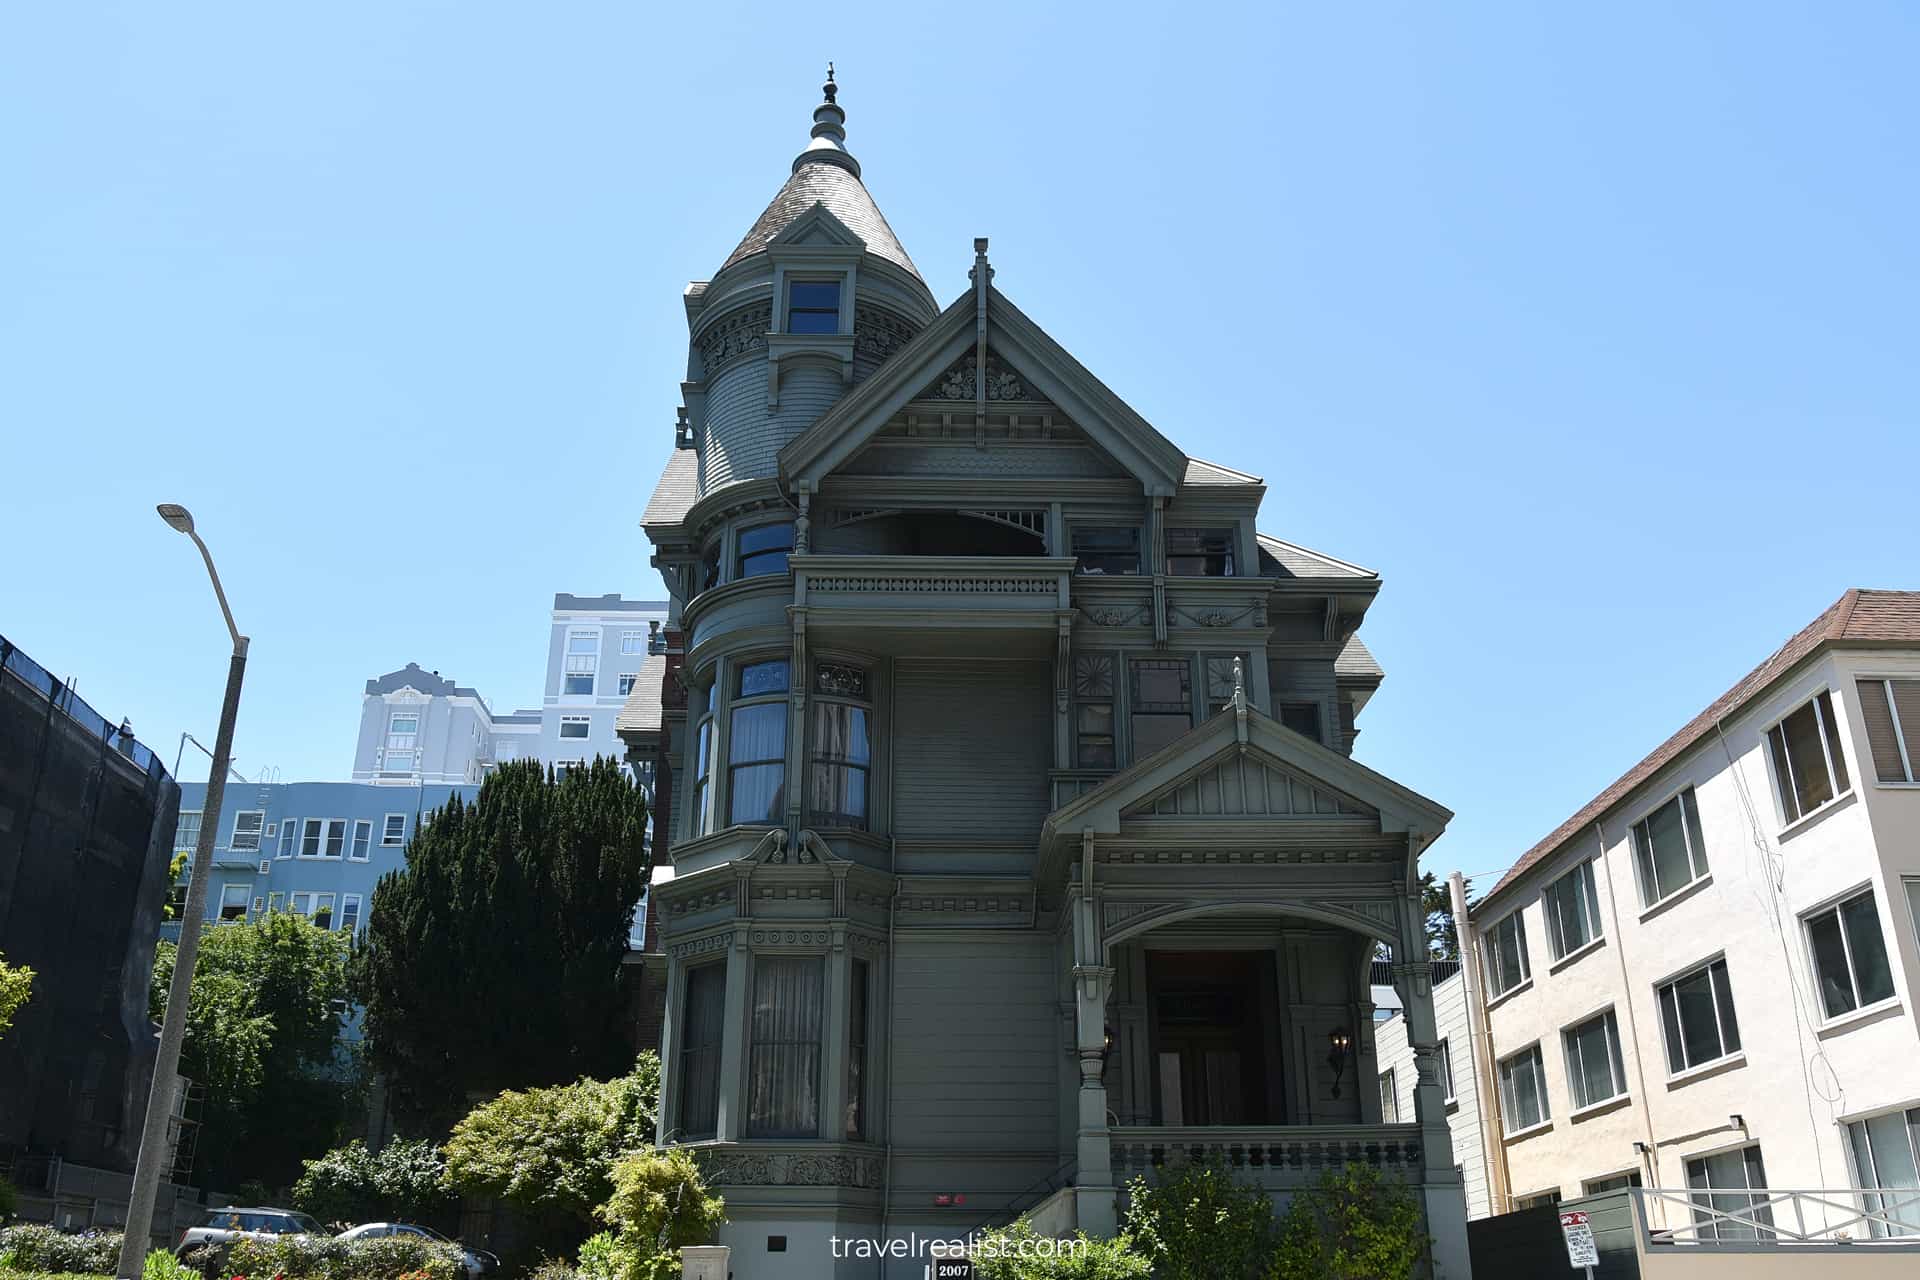 View of Haas-Lilienthal House from Franklin St in San Francisco, California, US